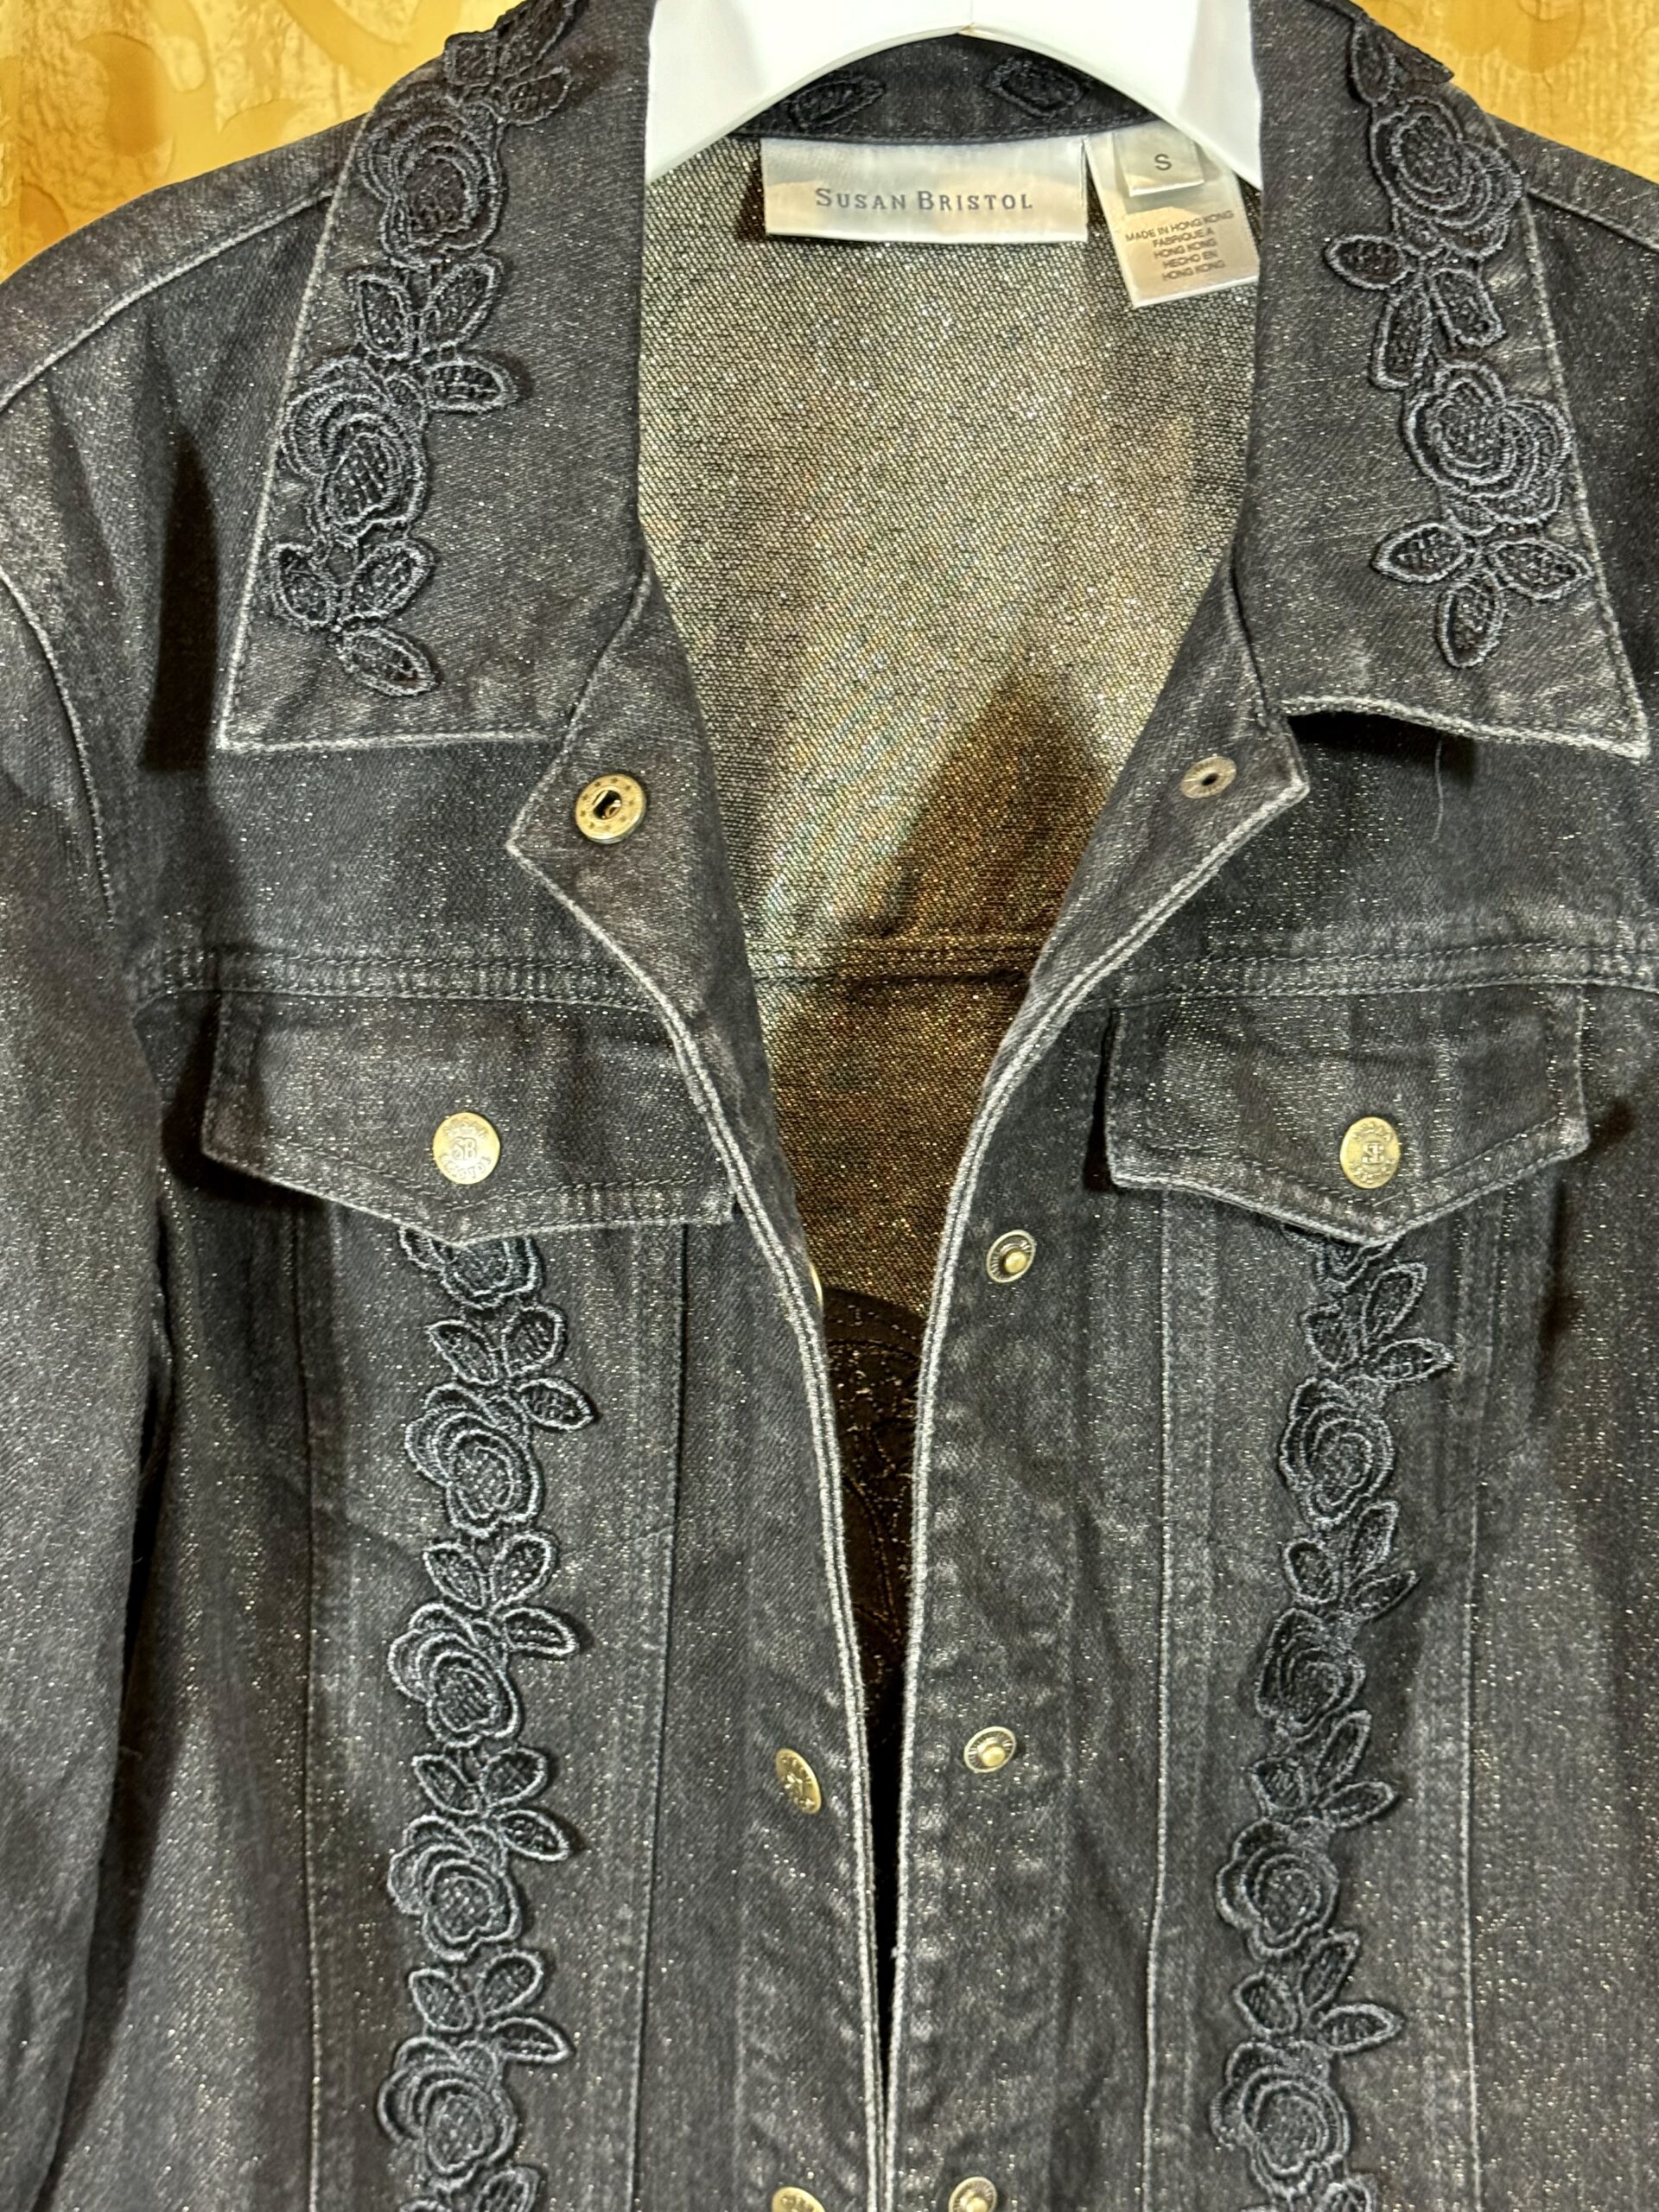 Chico's - Embroidered denim; bringing a little Spring to Winter.